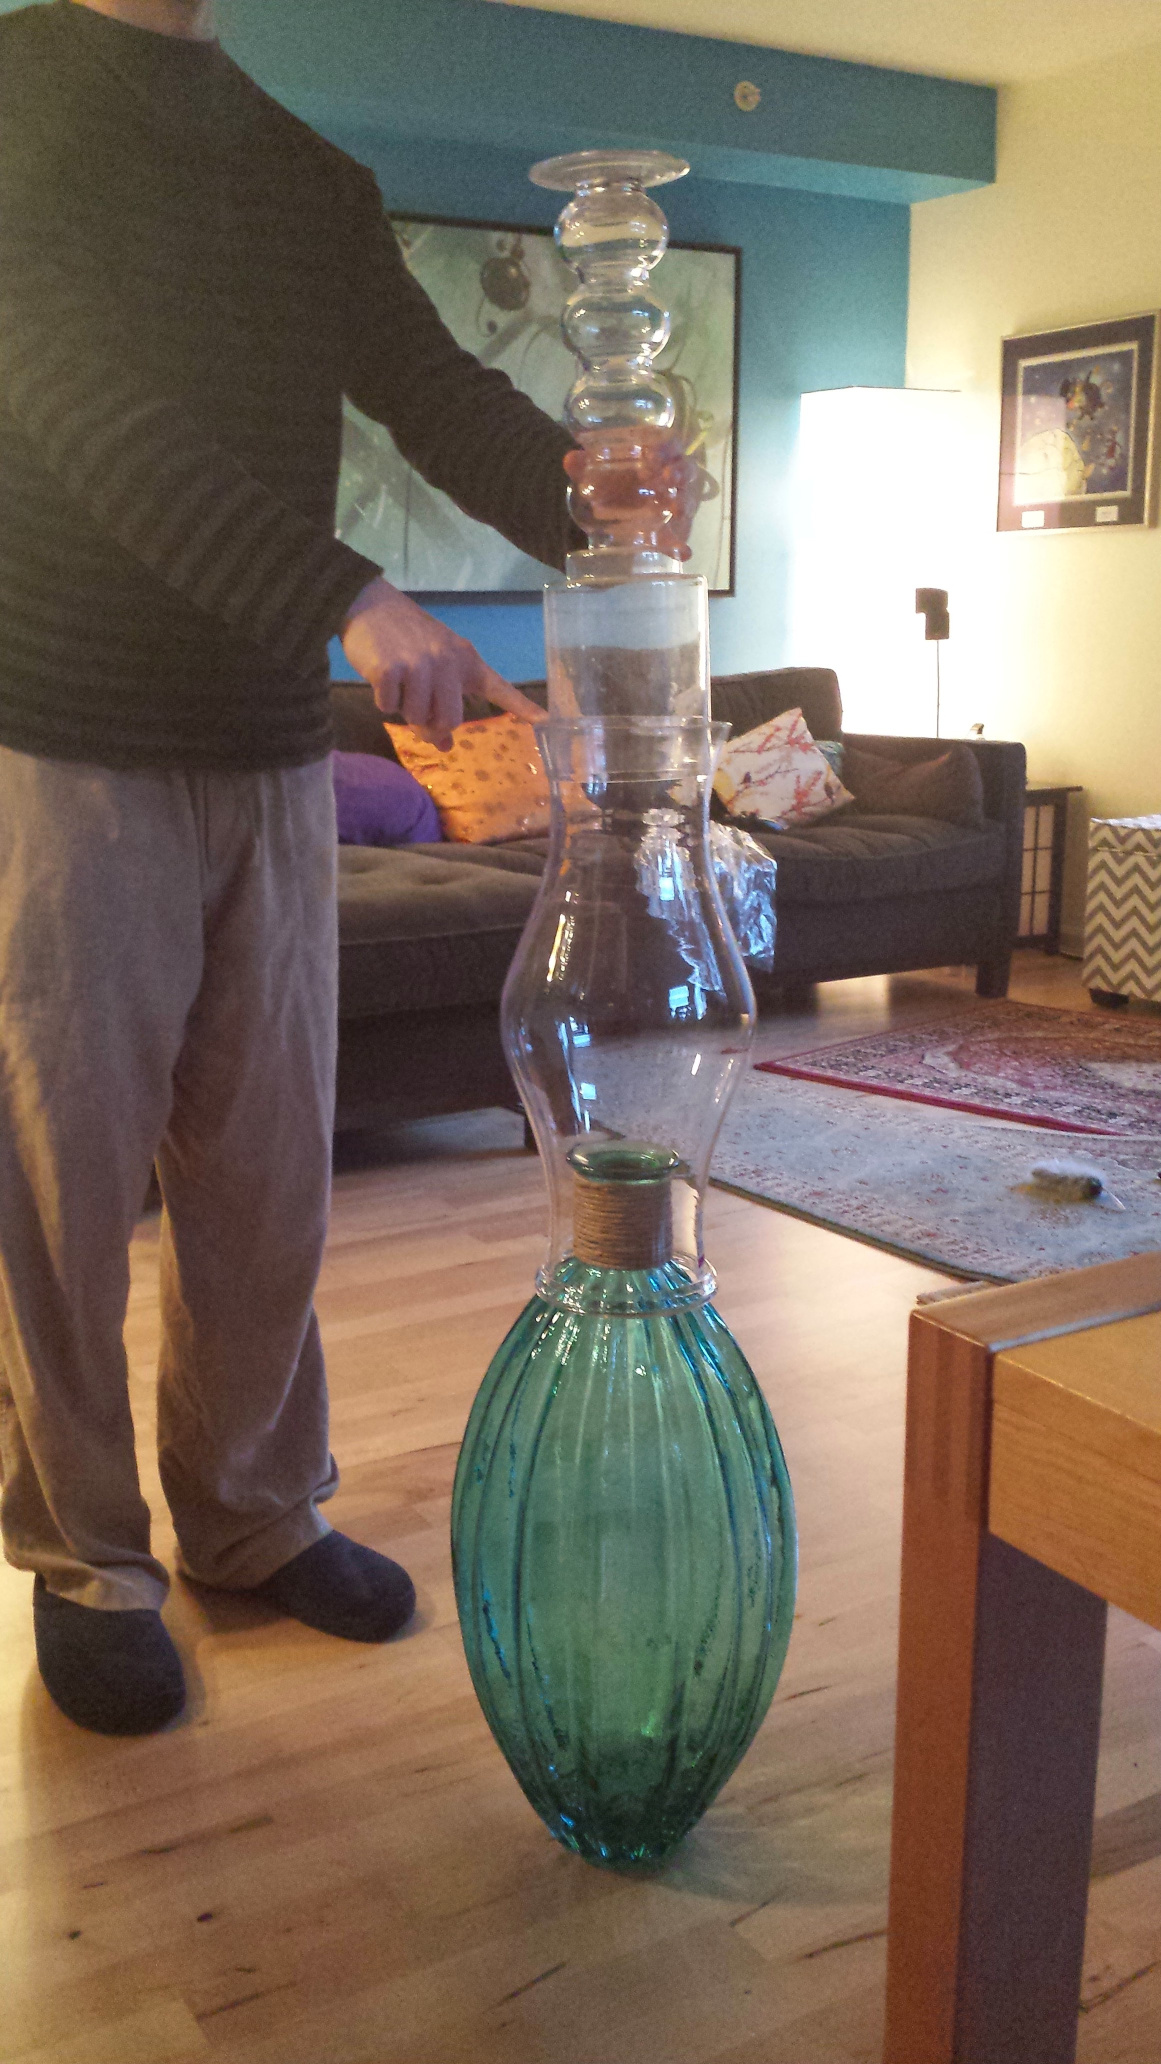 Habib supporting a precarious looking stack of glass vases about shoulder height.